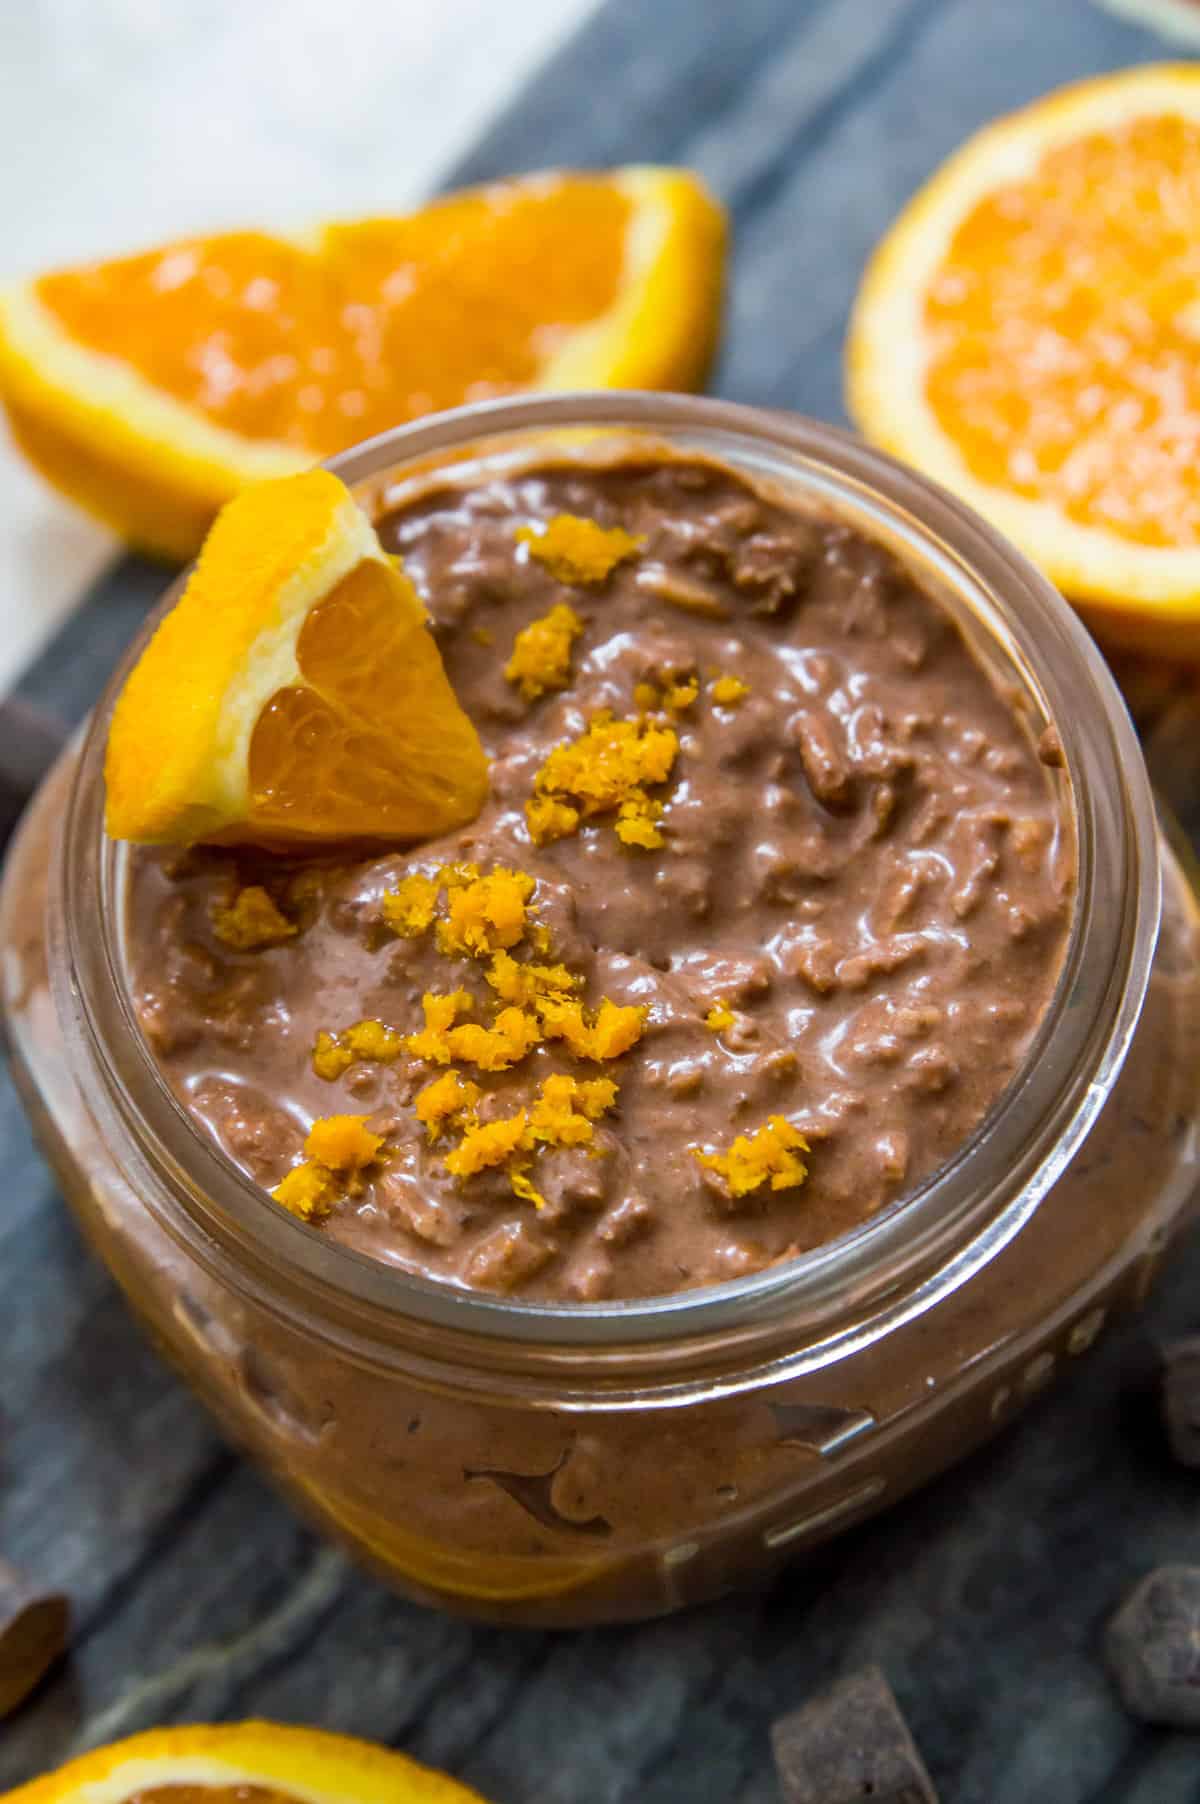 A jar of chocolate orange overnight oats garnished with orange zest and an orange wedge in it.